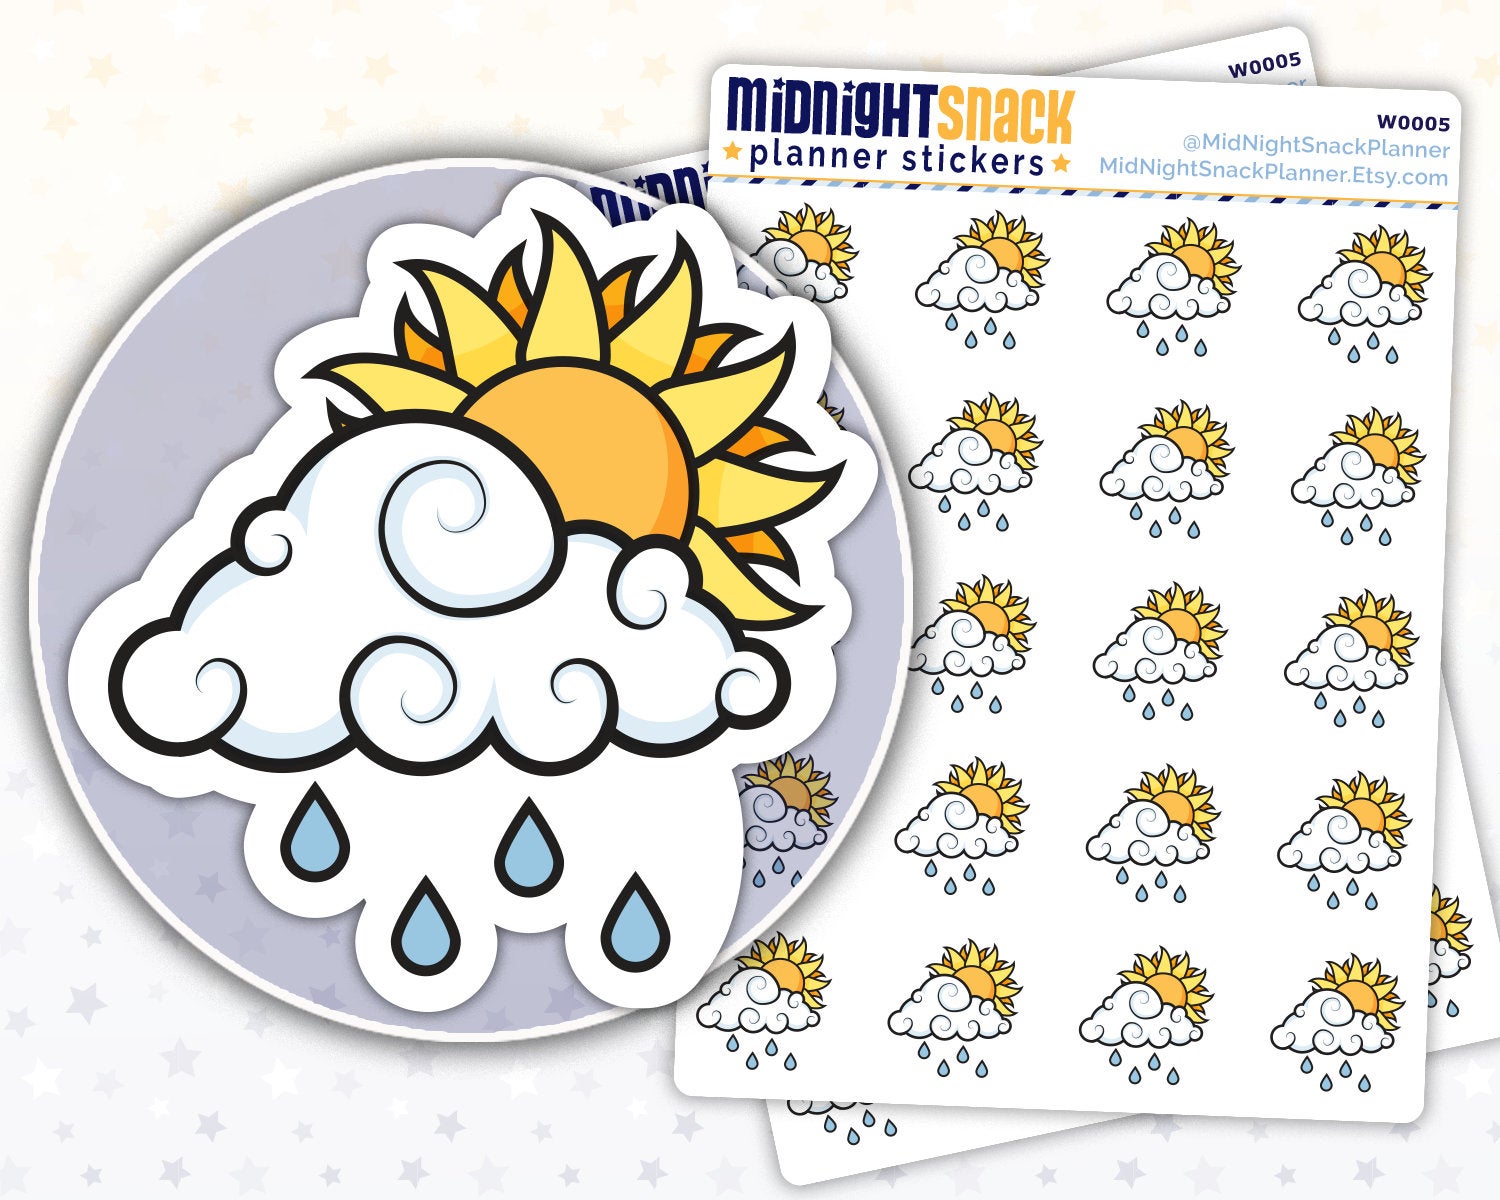 Scattered Showers Icon: Weather Planner Stickers Midnight Snack Planner